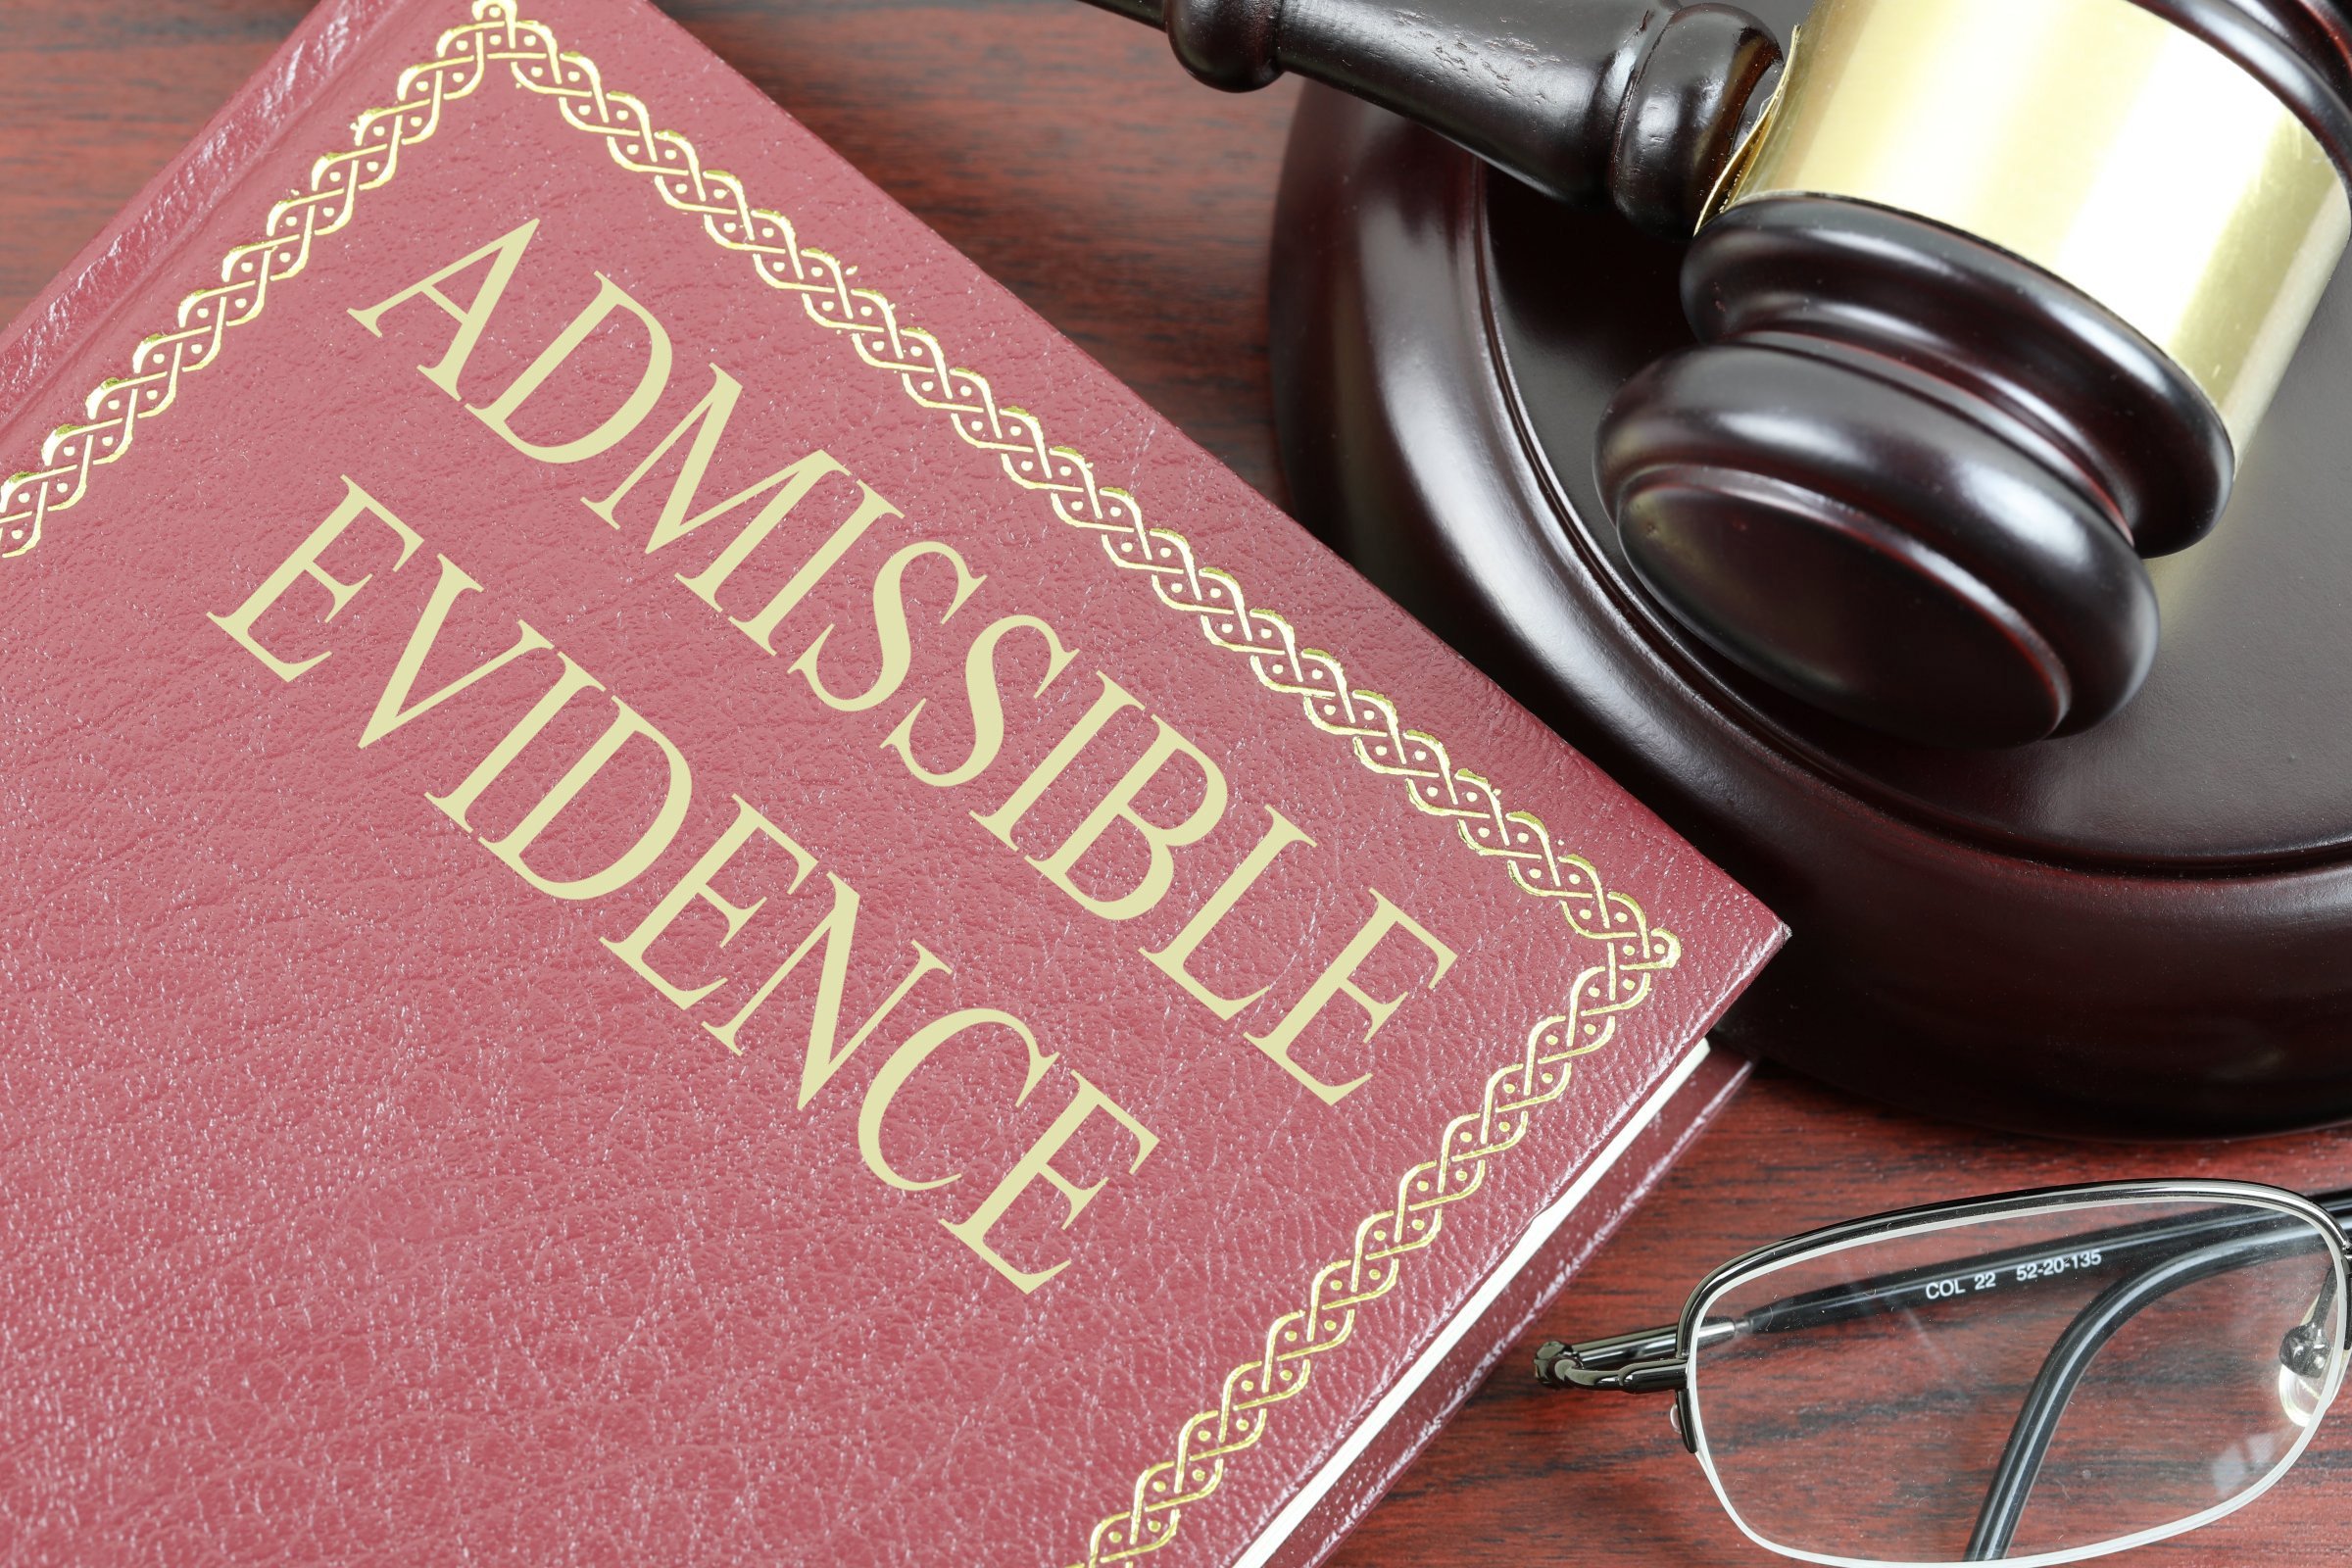 admissible evidence